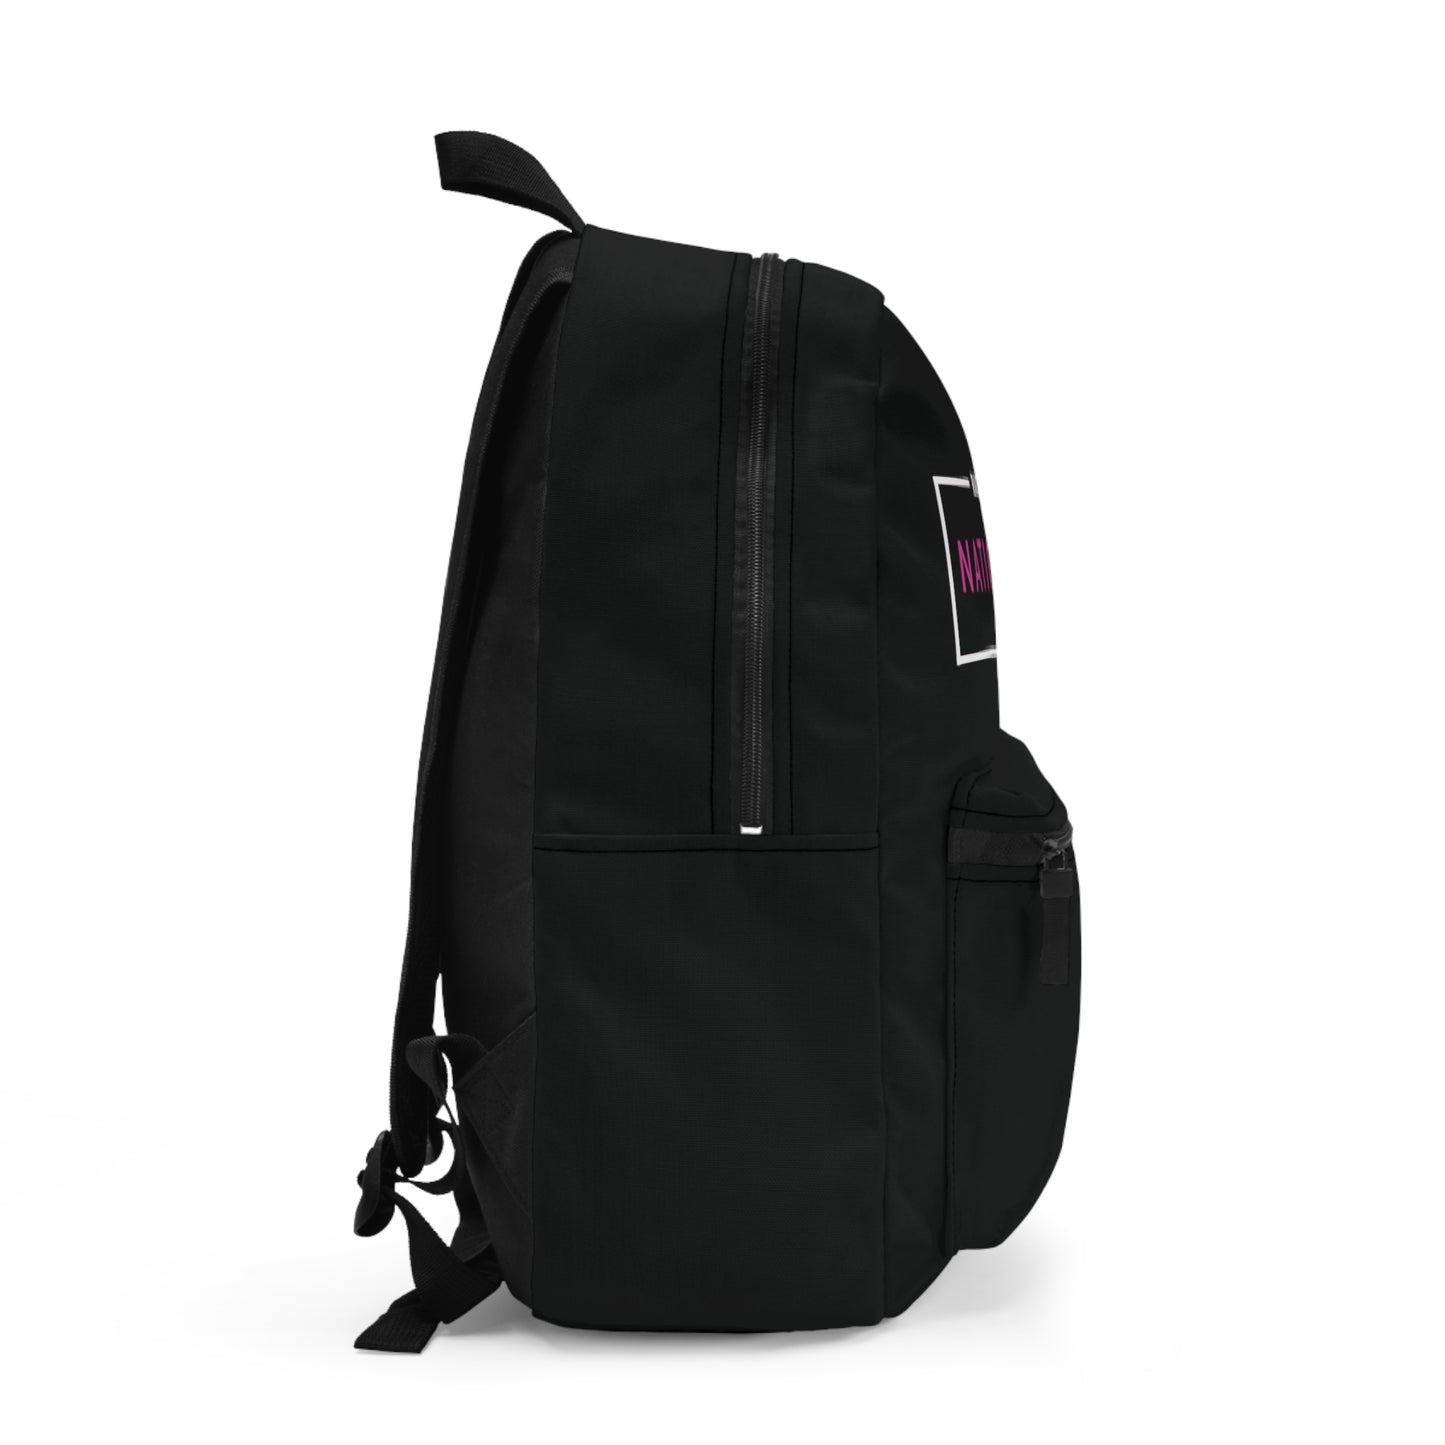 “National Rep” Backpack